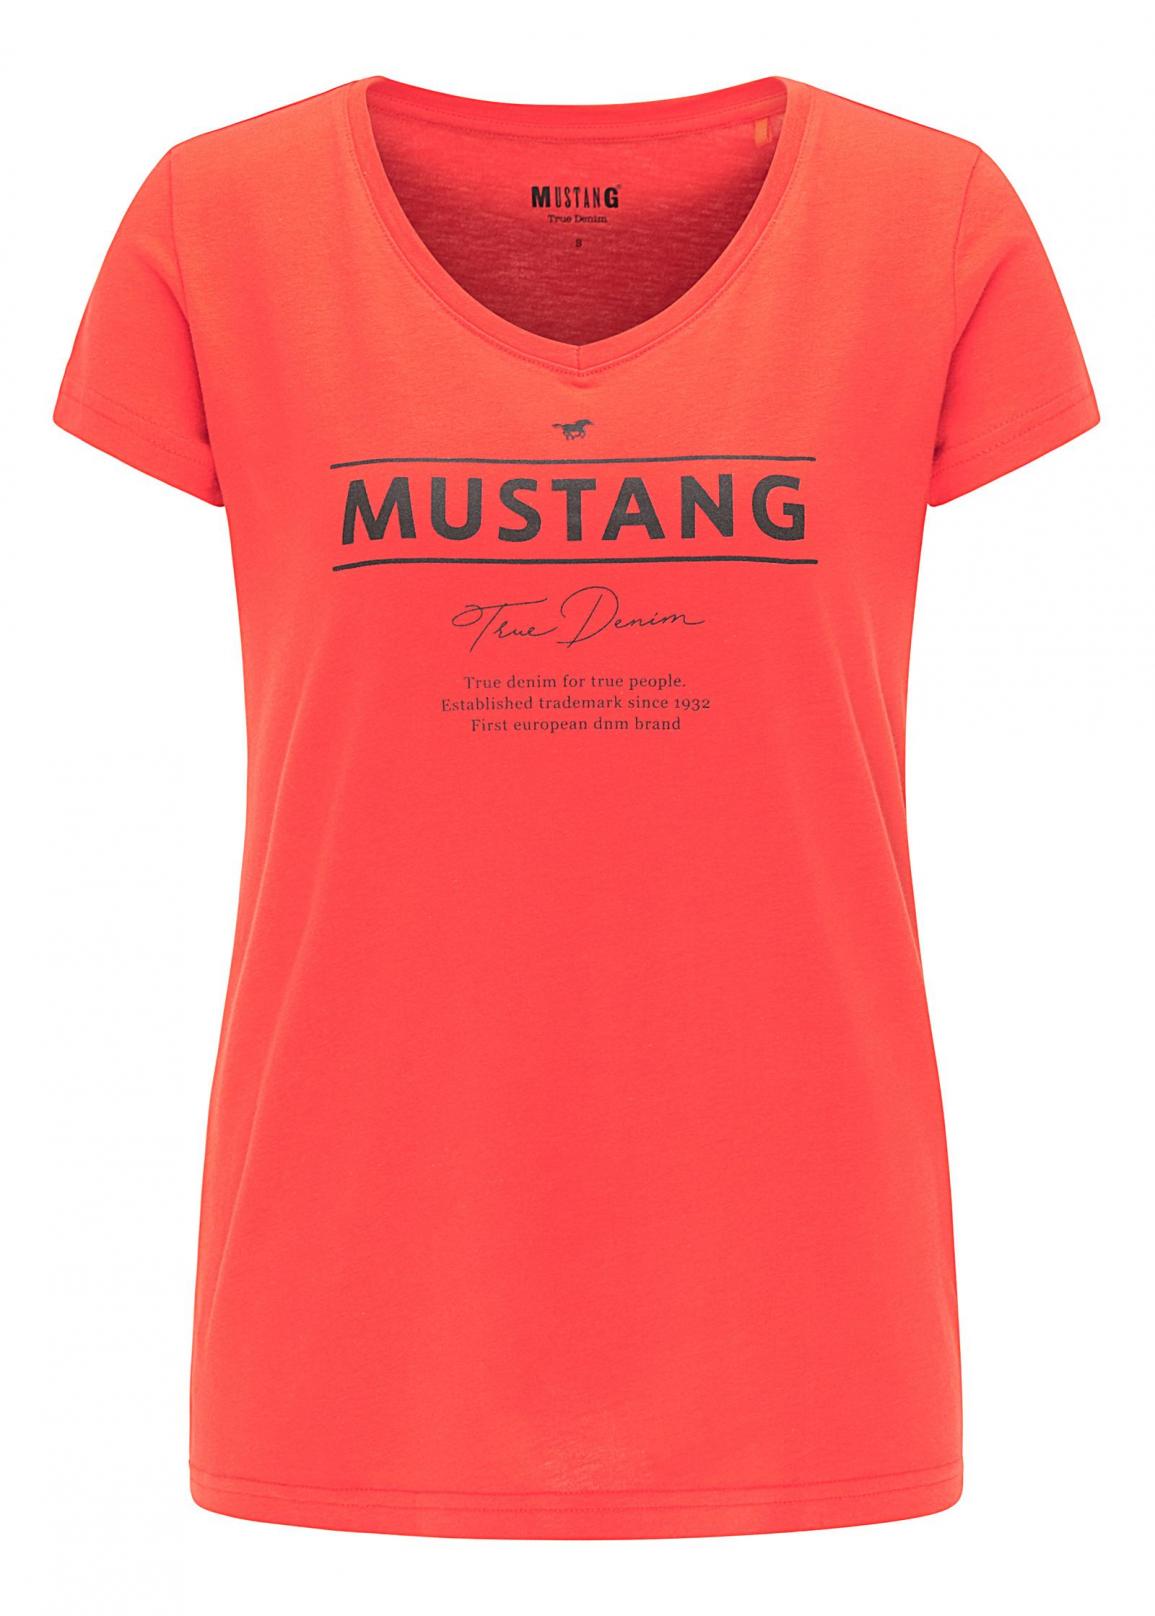 Mustang® Alexia V Print - Fiery Red